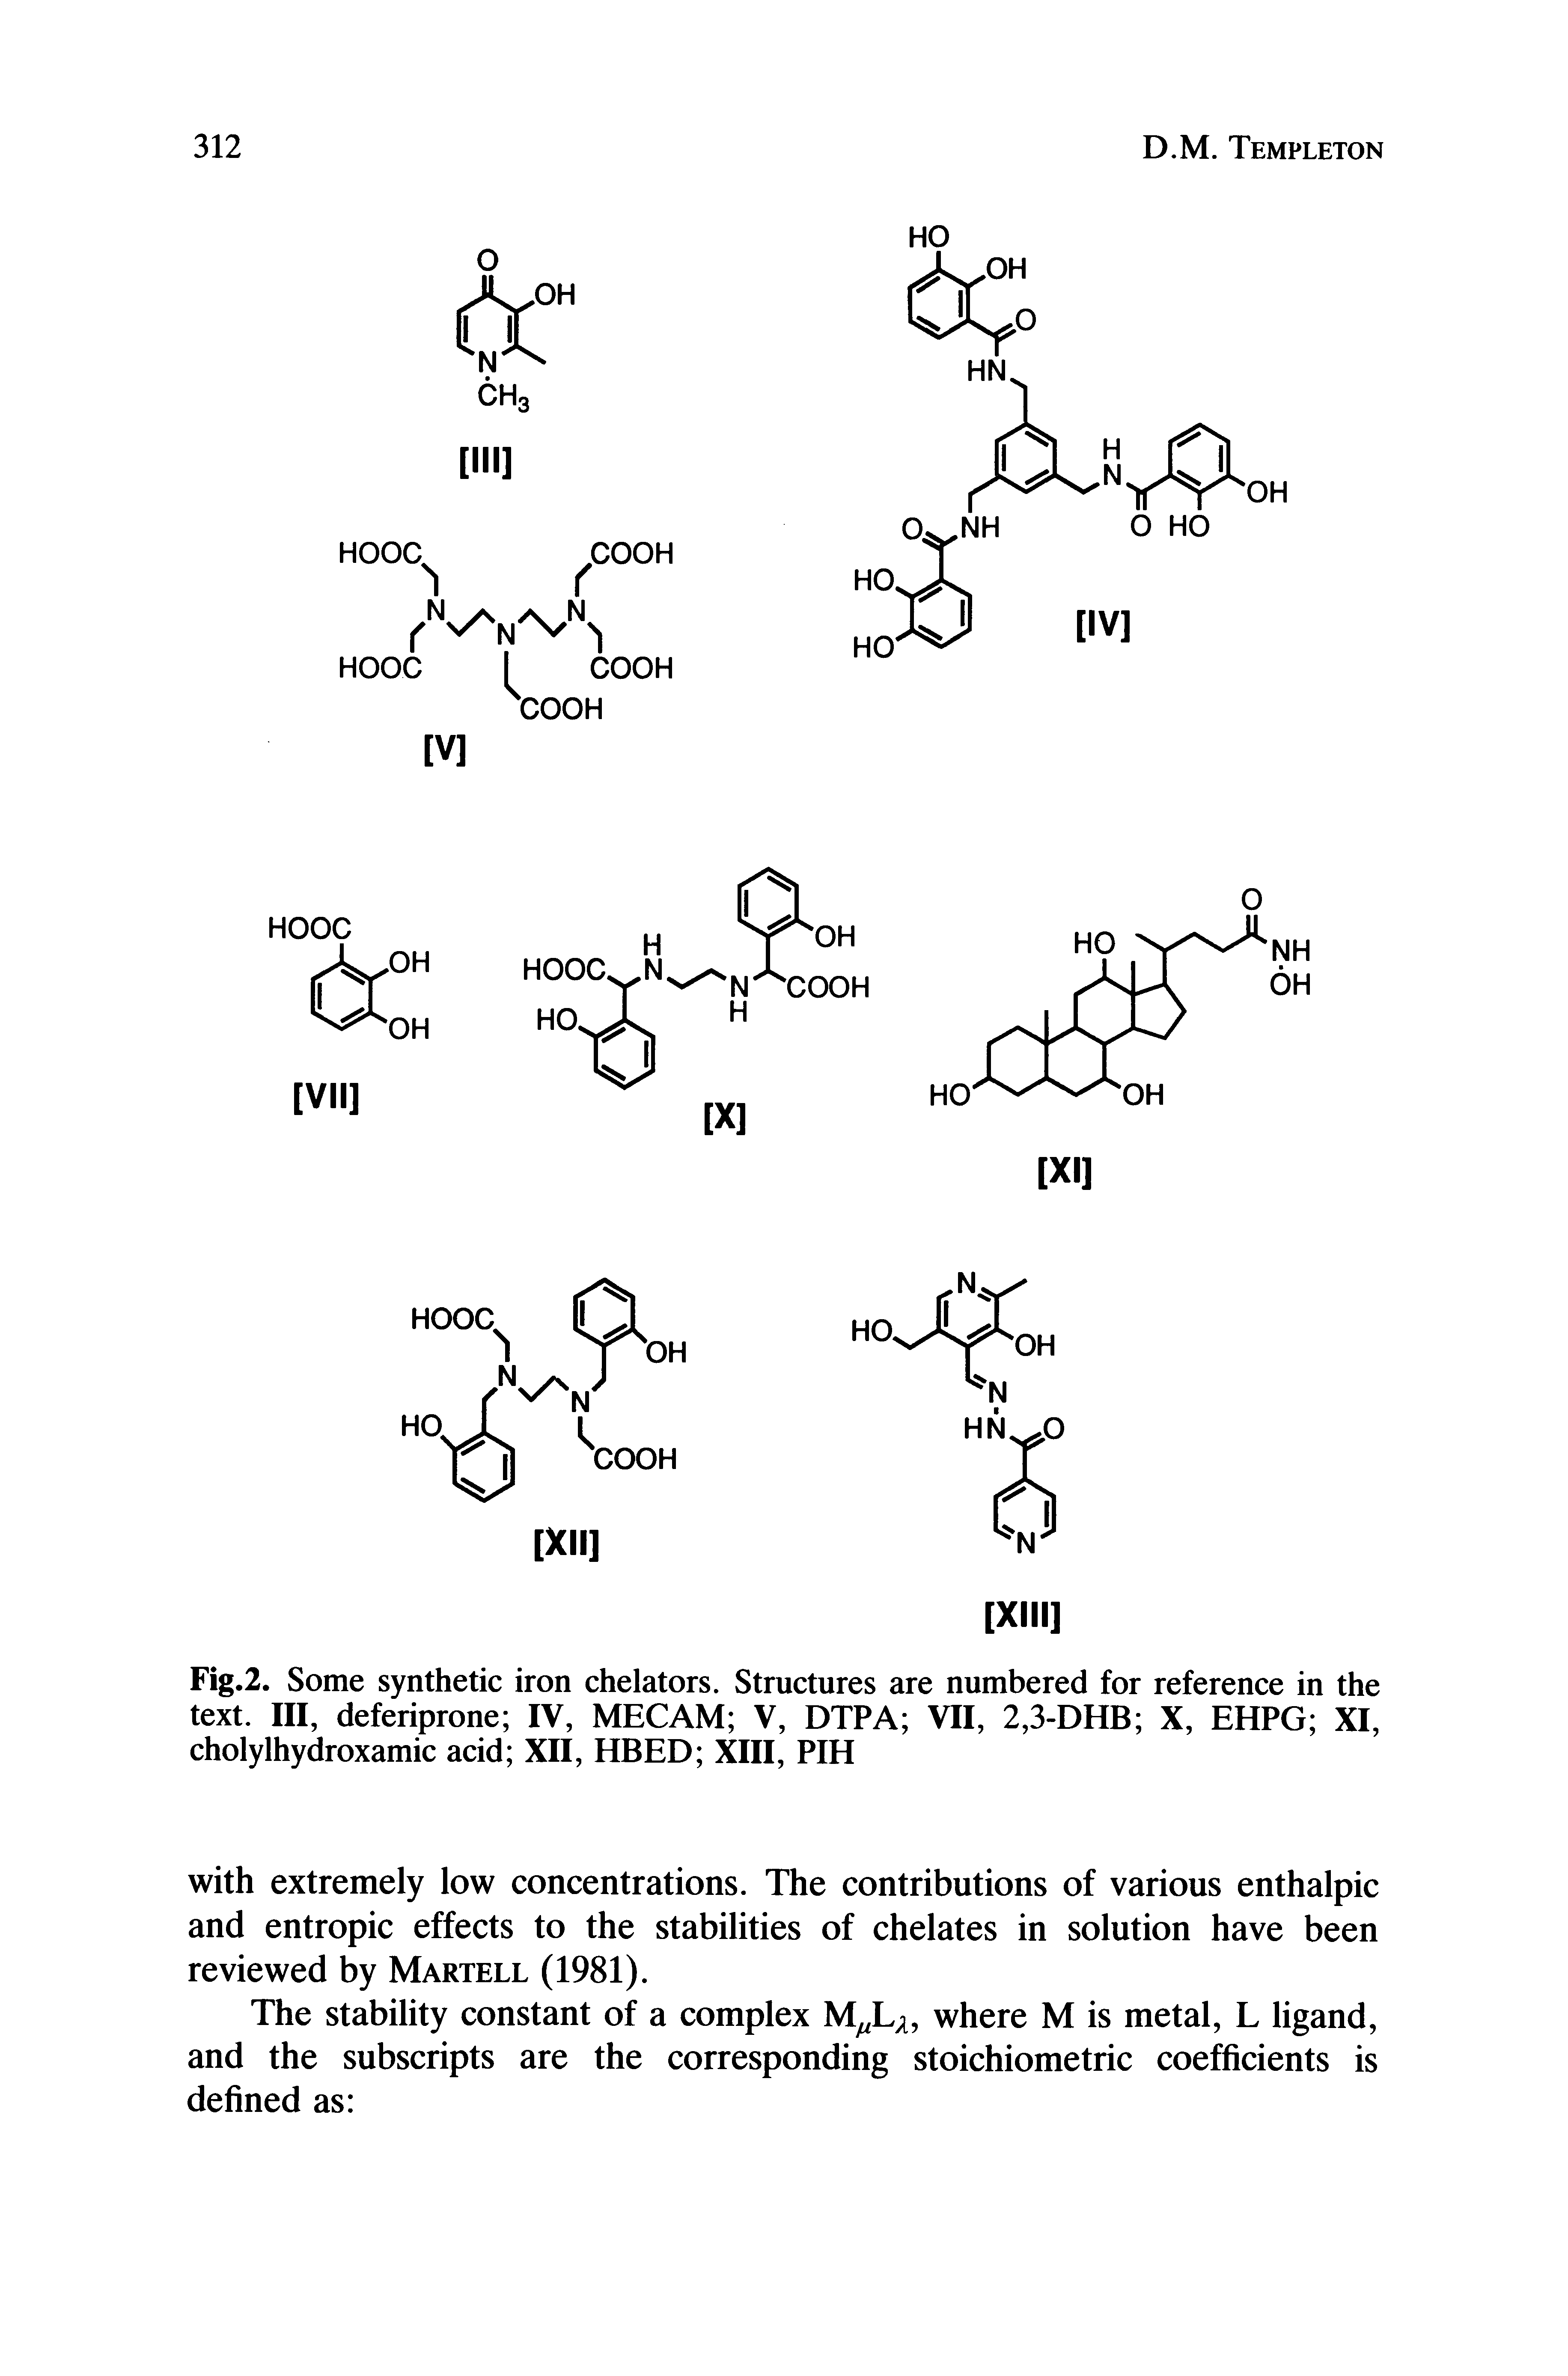 Fig.2. Some synthetic iron chelators. Structures are numbered for reference in the text. Ill, deferiprone IV, MECAM V, DTPA VII, 2,3-DHB X, EHPG XI, cholylhydroxamic acid XII, HBED XIII, PIH...